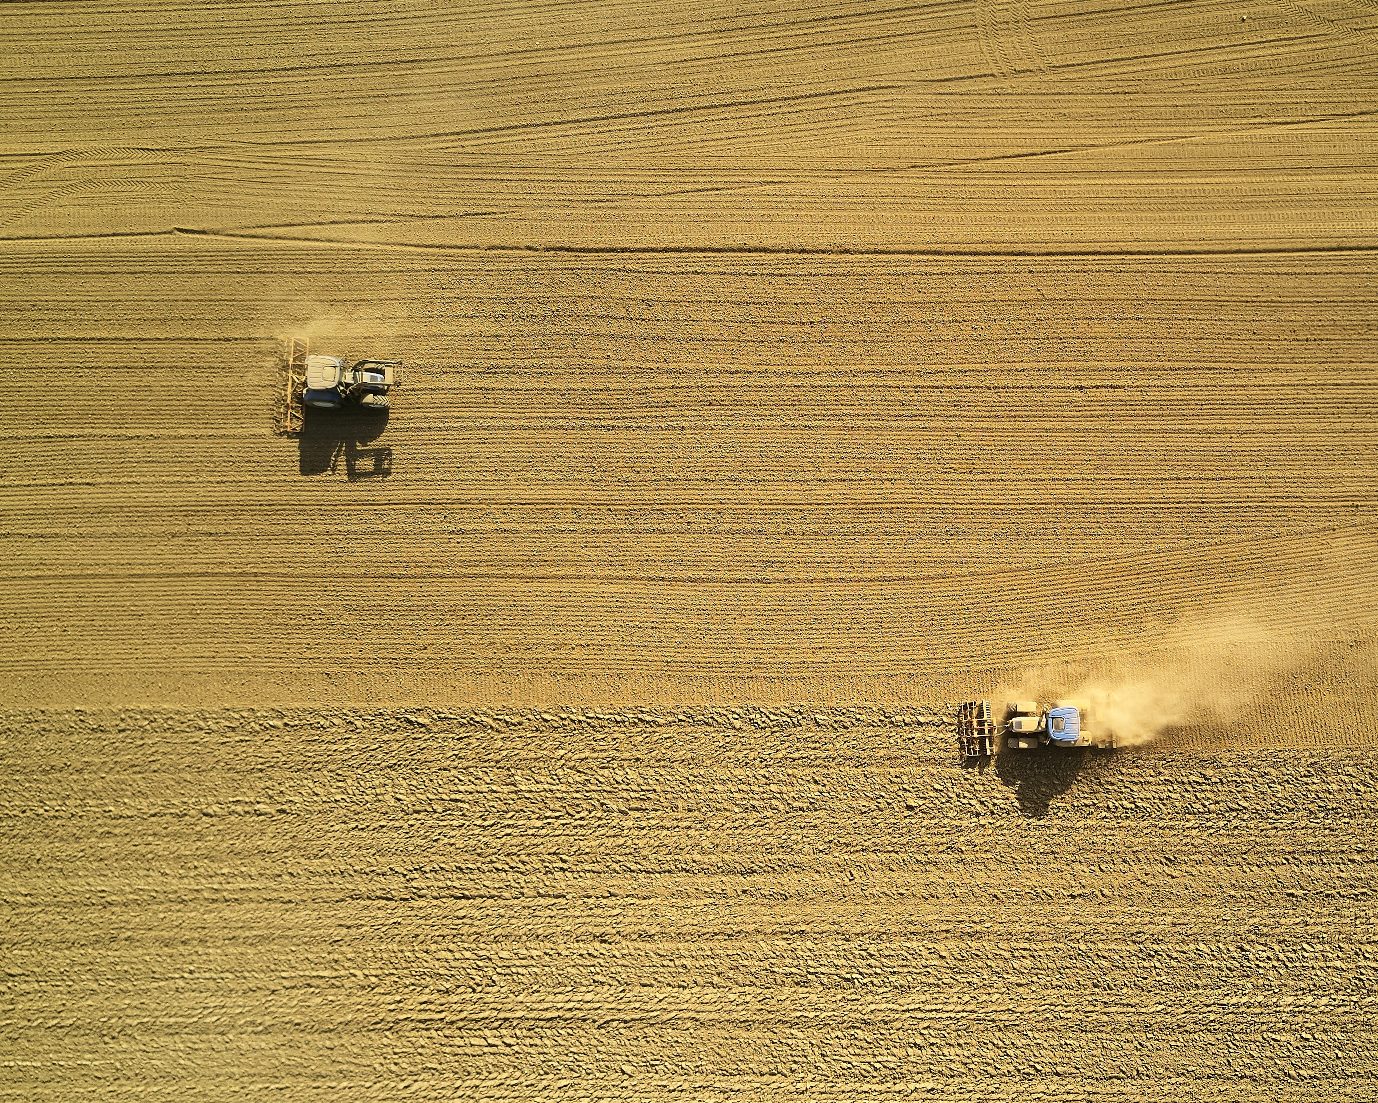 A quarter of global harvests at risk if agriculture does not adapt to climate change